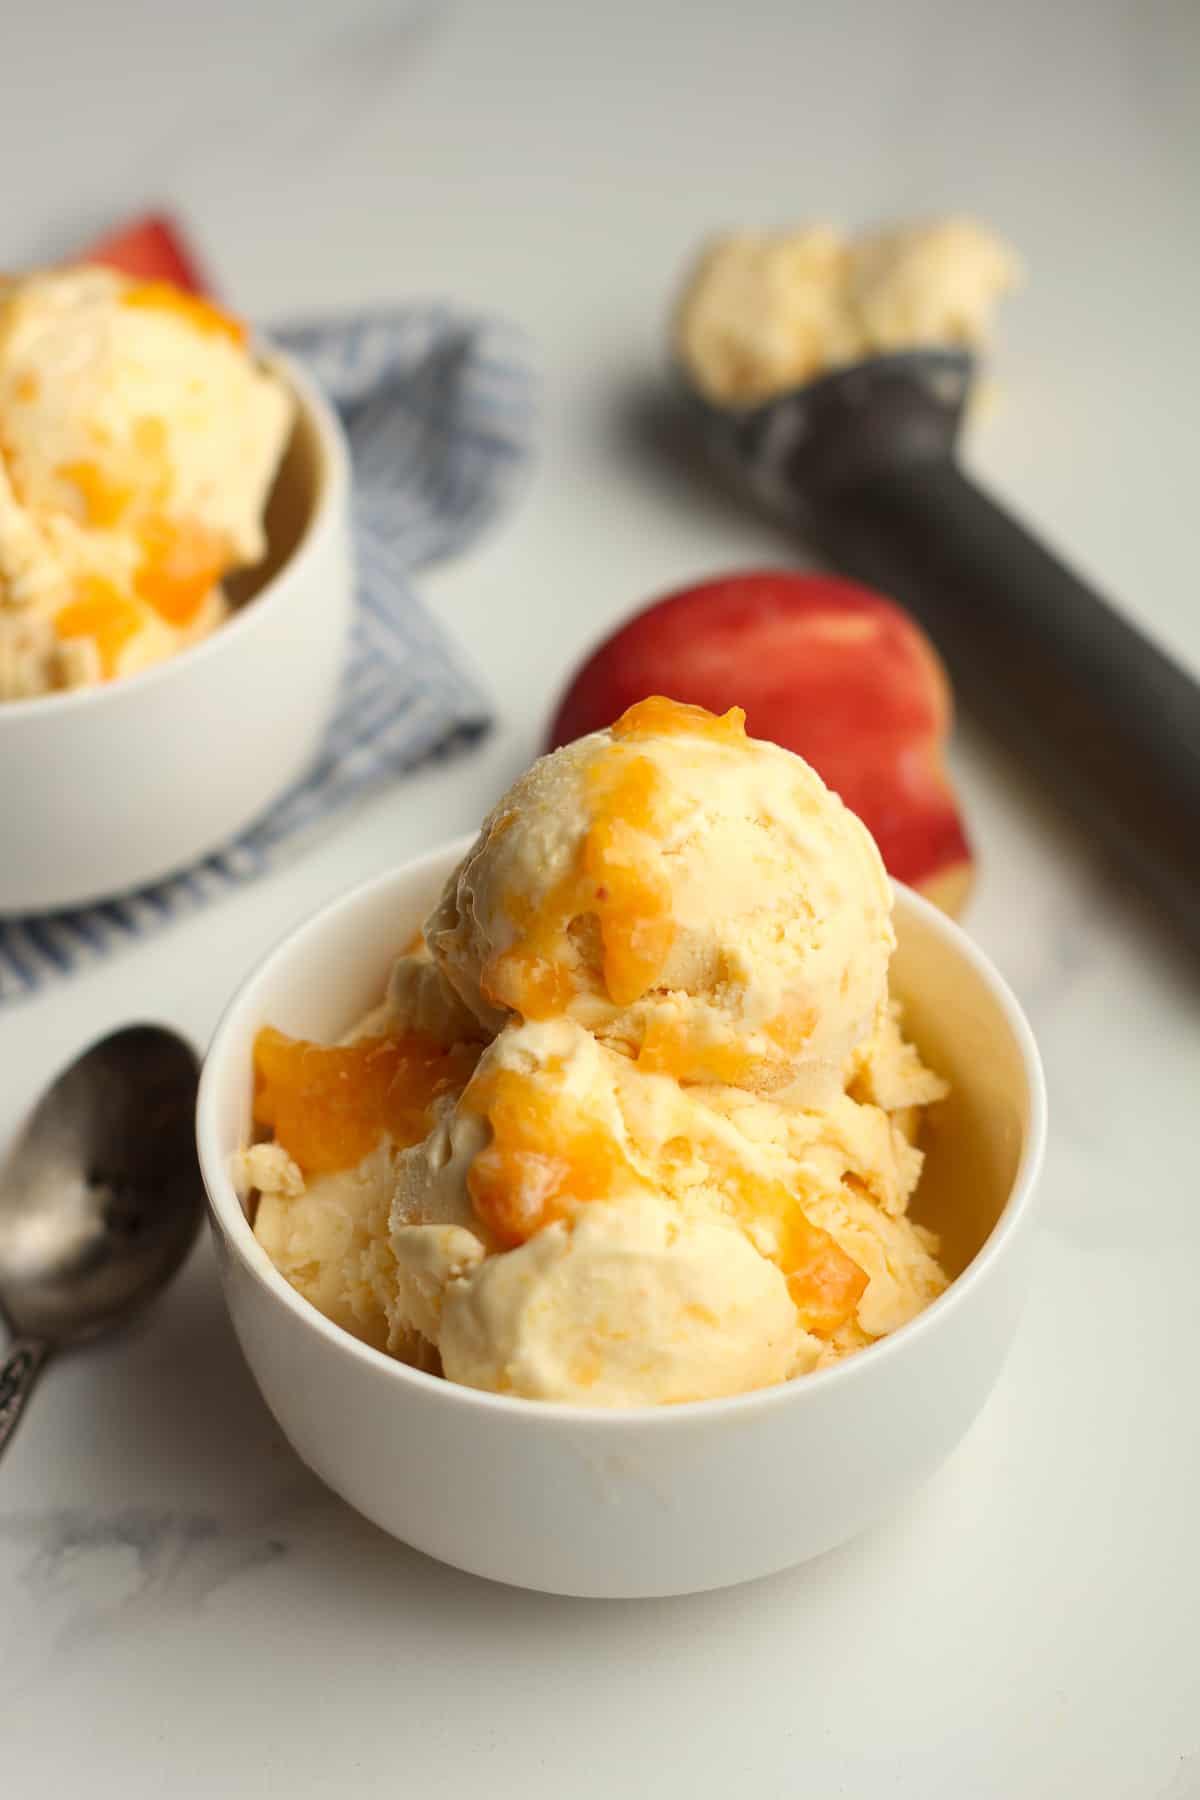 Side shot of two bowls of peach ice cream.